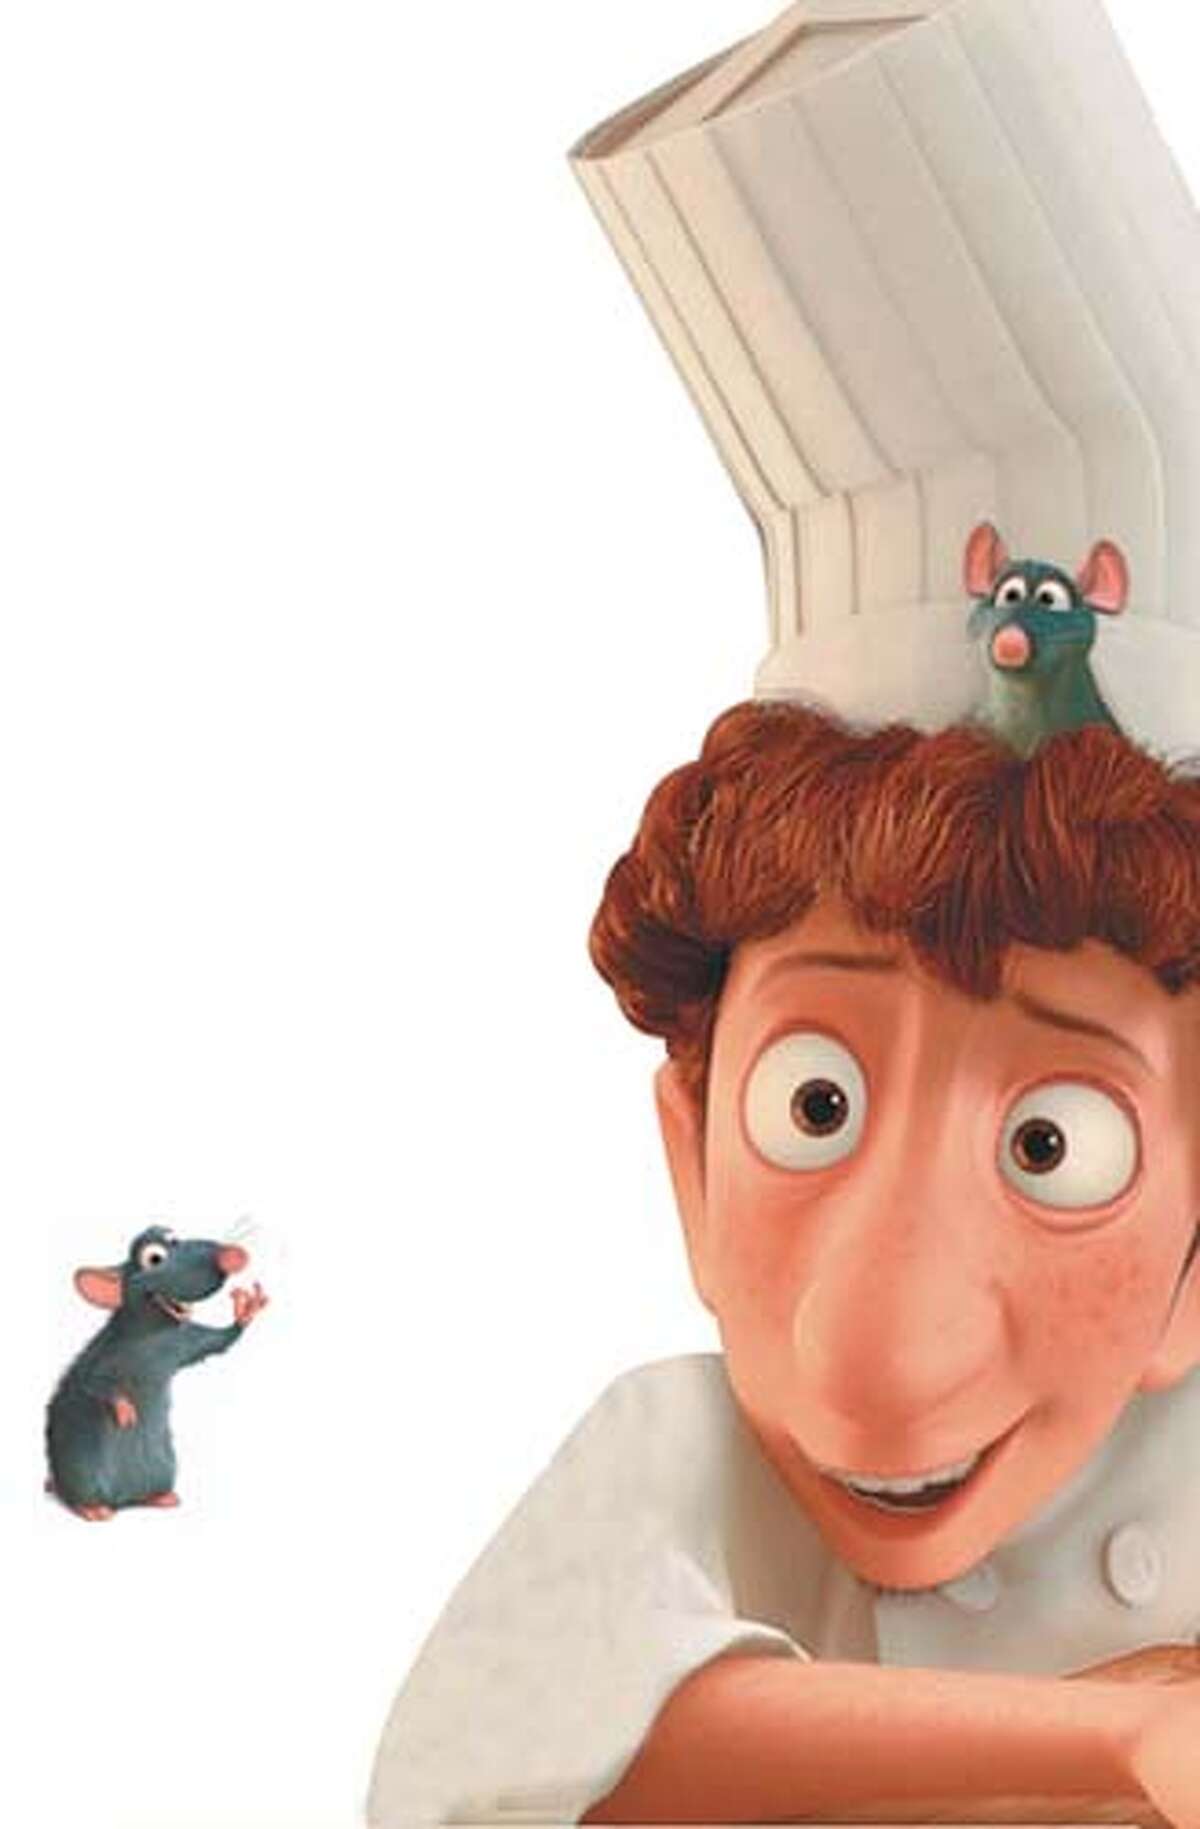 BAY AREA FLAVORS FOOD TALE / For its new film 'Ratatouille,' Pixar explored  our obsession with cuisine